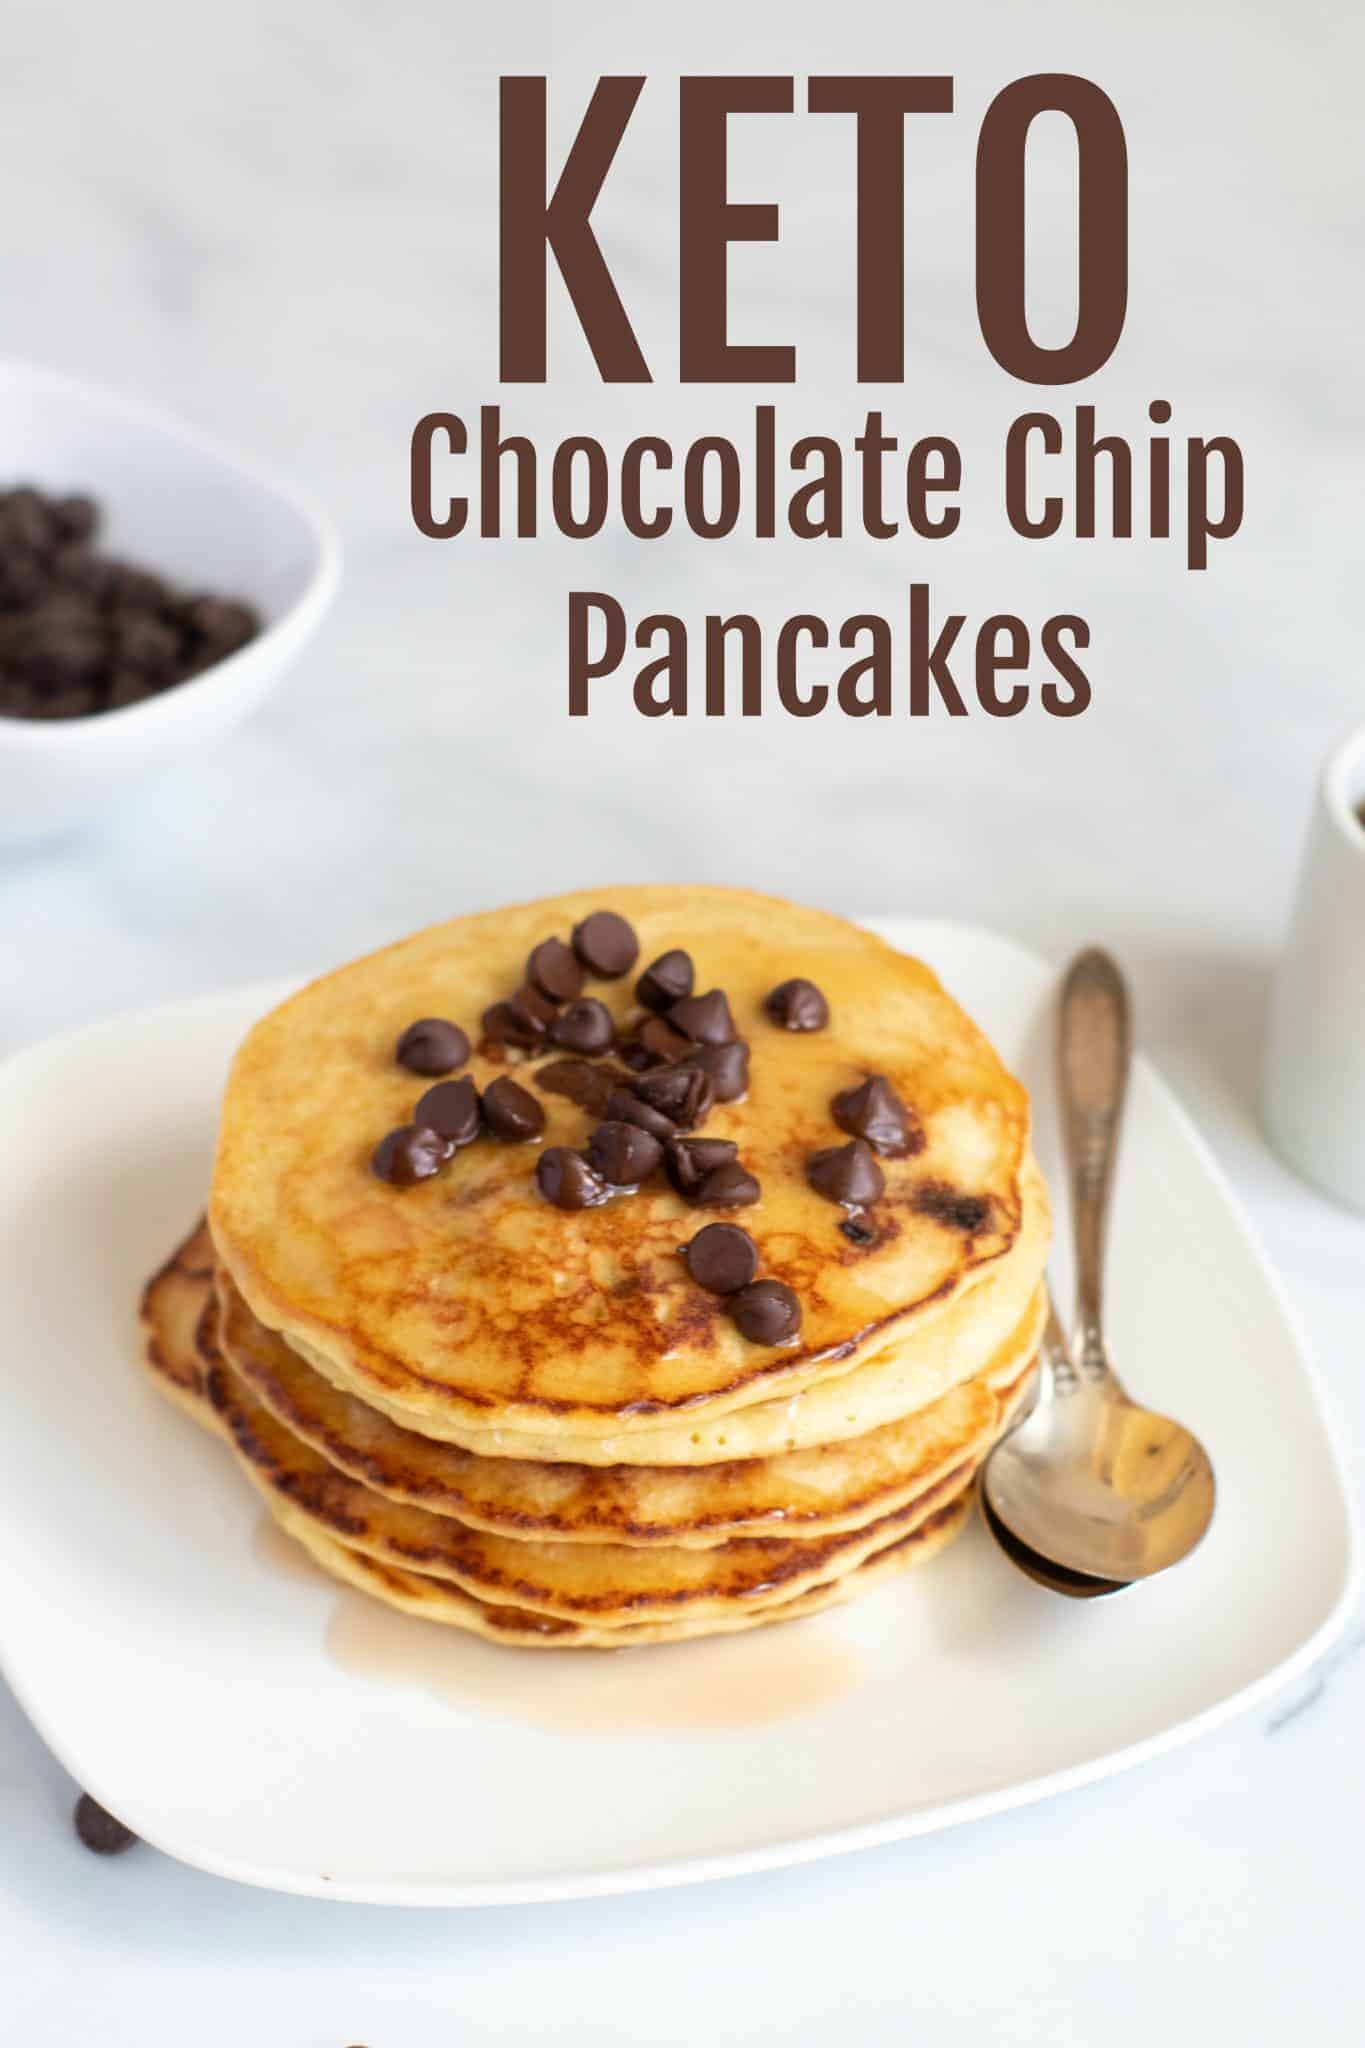 Keto Chocolate Chip Pancakes on a plate with a spoon.